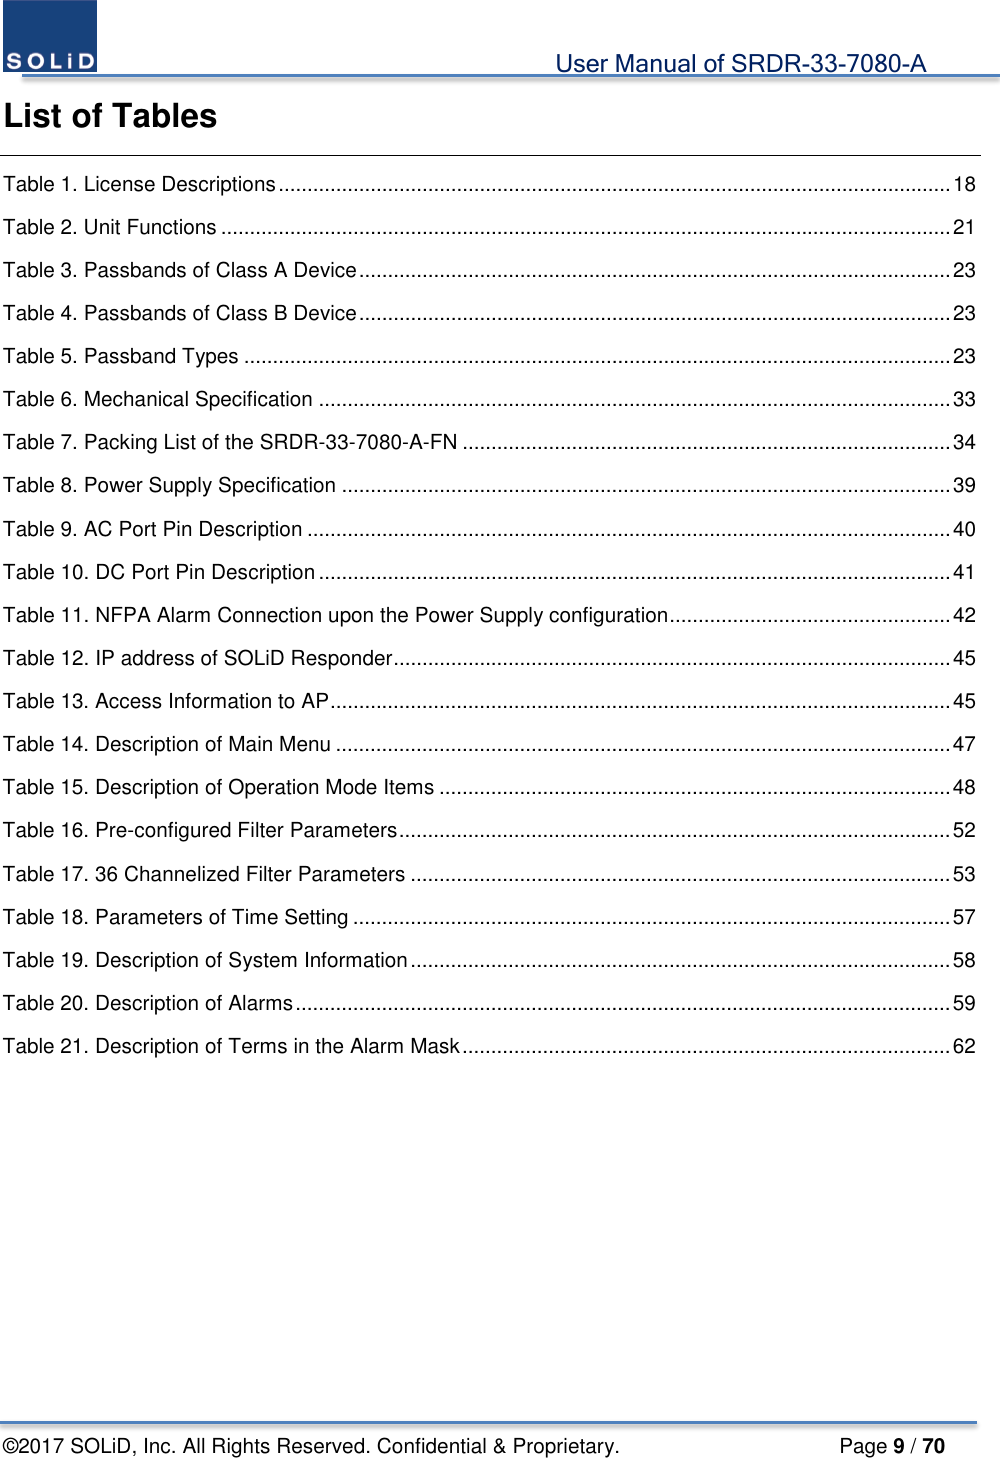                                             User Manual of SRDR-33-7080-A ©2017 SOLiD, Inc. All Rights Reserved. Confidential &amp; Proprietary.                     Page 9 / 70 List of Tables Table 1. License Descriptions ..................................................................................................................... 18 Table 2. Unit Functions ............................................................................................................................... 21 Table 3. Passbands of Class A Device ....................................................................................................... 23 Table 4. Passbands of Class B Device ....................................................................................................... 23 Table 5. Passband Types ........................................................................................................................... 23 Table 6. Mechanical Specification .............................................................................................................. 33 Table 7. Packing List of the SRDR-33-7080-A-FN ..................................................................................... 34 Table 8. Power Supply Specification .......................................................................................................... 39 Table 9. AC Port Pin Description ................................................................................................................ 40 Table 10. DC Port Pin Description .............................................................................................................. 41 Table 11. NFPA Alarm Connection upon the Power Supply configuration ................................................. 42 Table 12. IP address of SOLiD Responder ................................................................................................. 45 Table 13. Access Information to AP ............................................................................................................ 45 Table 14. Description of Main Menu ........................................................................................................... 47 Table 15. Description of Operation Mode Items ......................................................................................... 48 Table 16. Pre-configured Filter Parameters ................................................................................................ 52 Table 17. 36 Channelized Filter Parameters .............................................................................................. 53 Table 18. Parameters of Time Setting ........................................................................................................ 57 Table 19. Description of System Information .............................................................................................. 58 Table 20. Description of Alarms .................................................................................................................. 59 Table 21. Description of Terms in the Alarm Mask ..................................................................................... 62    